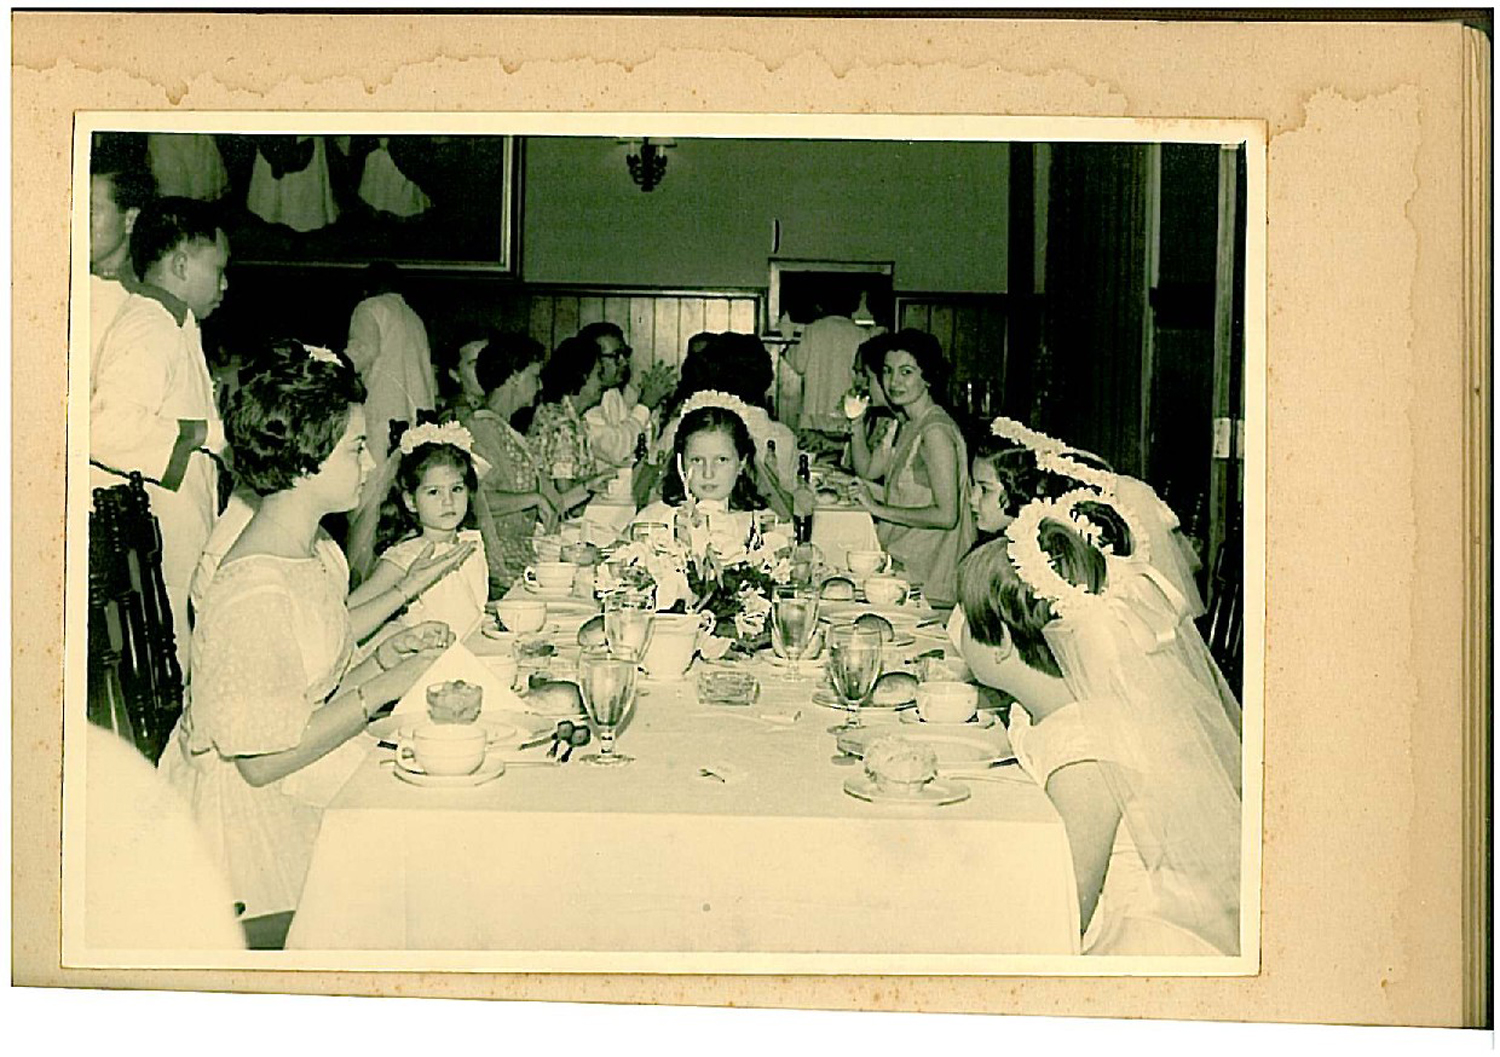 peggy_as_flower_girl__only_little__girl_at_right_side__of_table